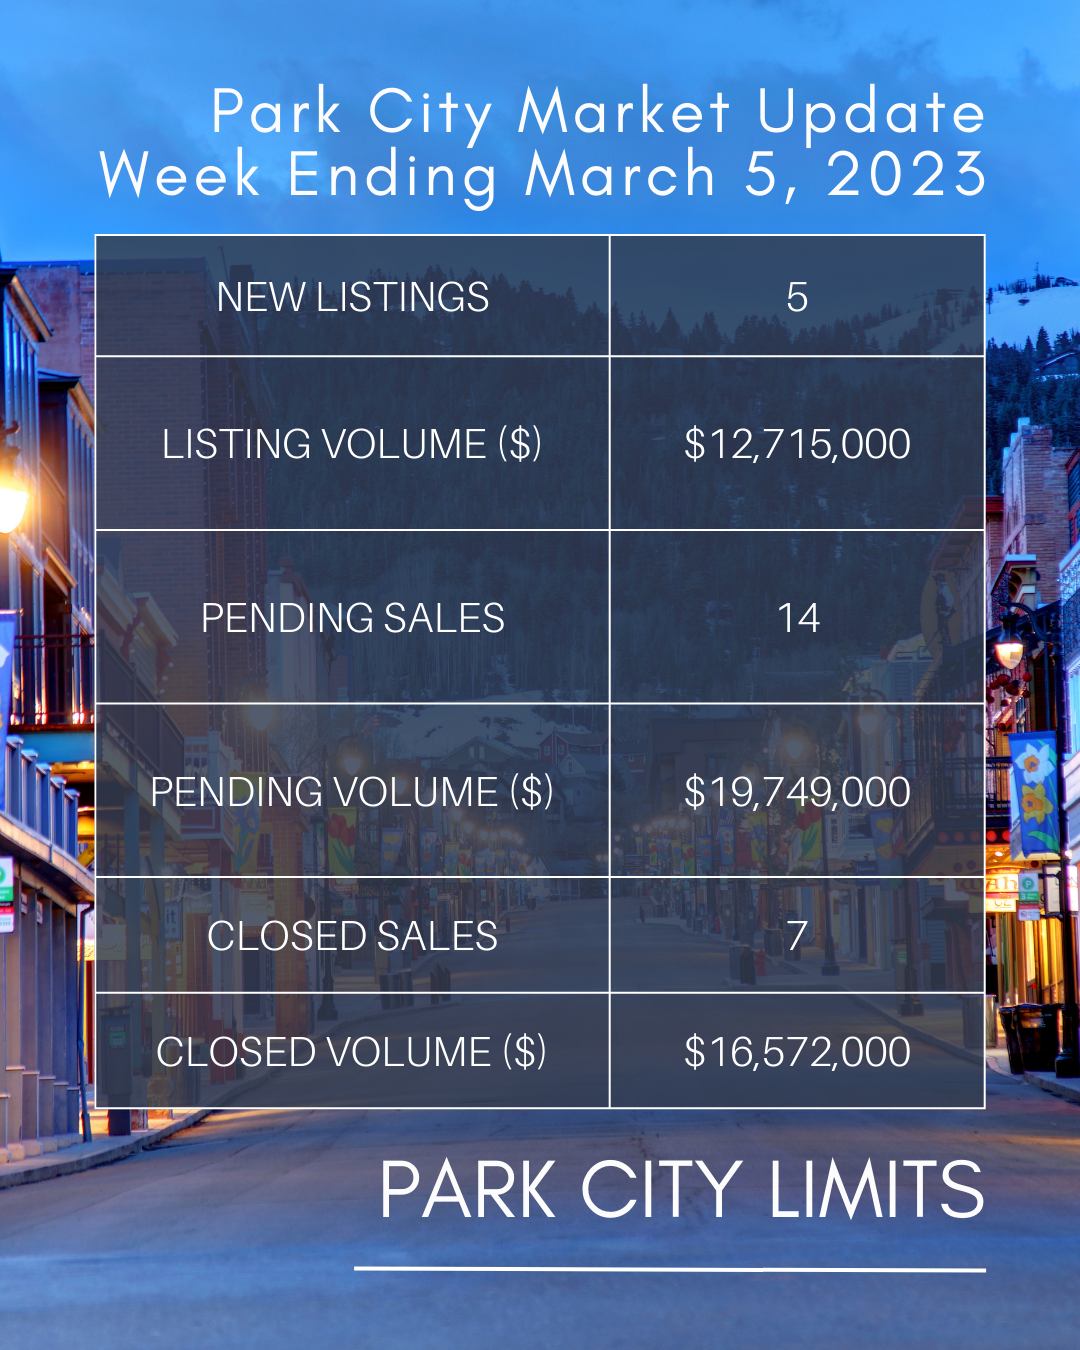 Image of Park City Main Street with Market Statistics form March 5, 2023